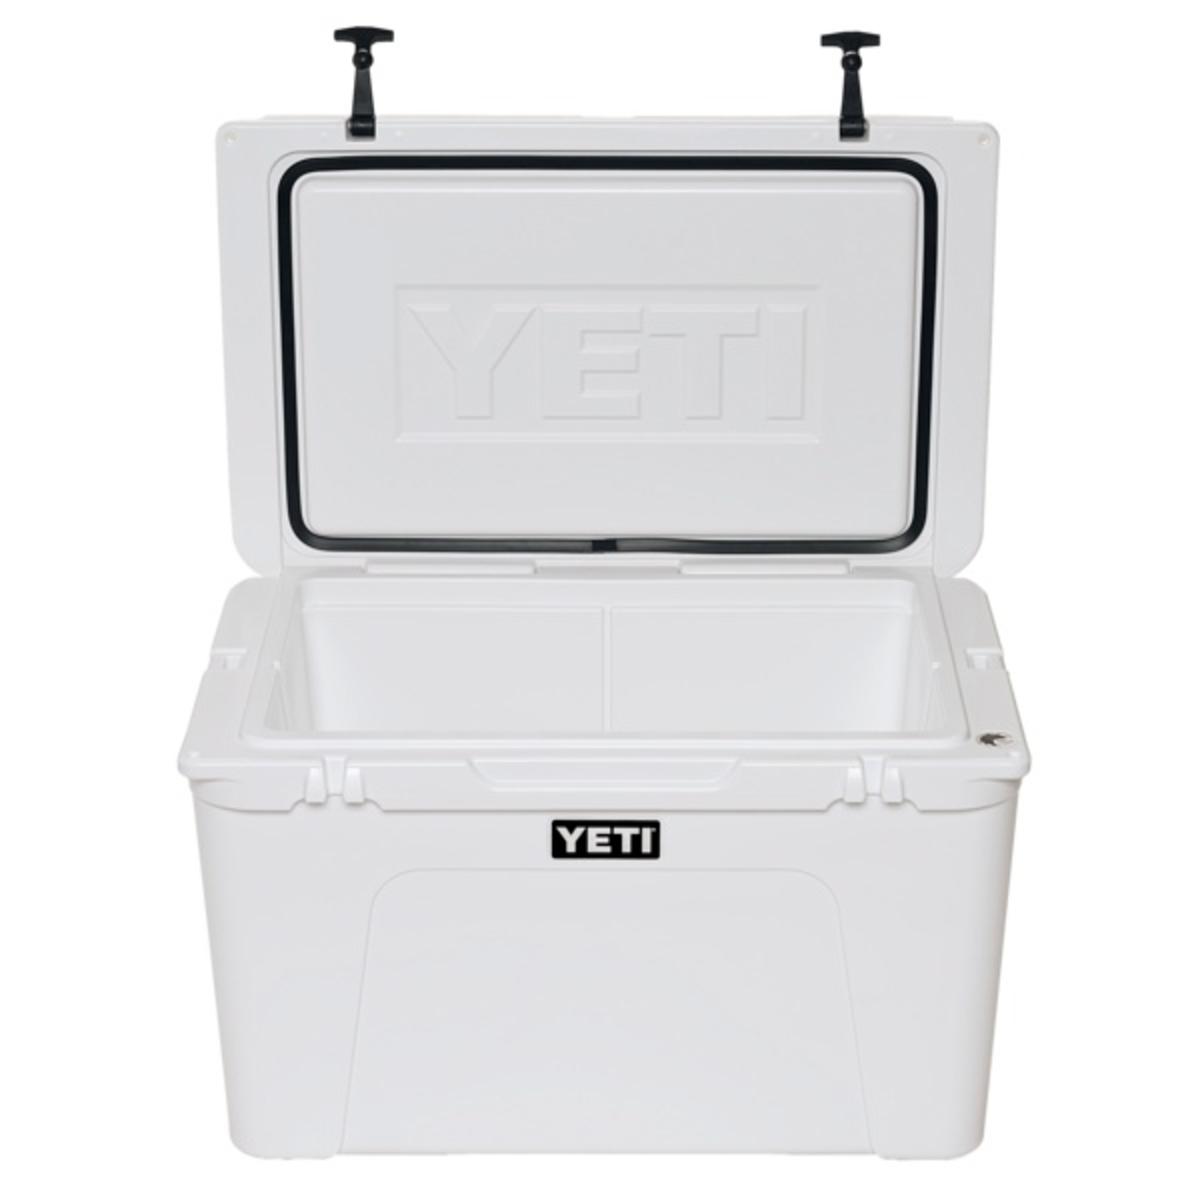 YETI® TUNDRA® 105 HARD COOLER white open front view